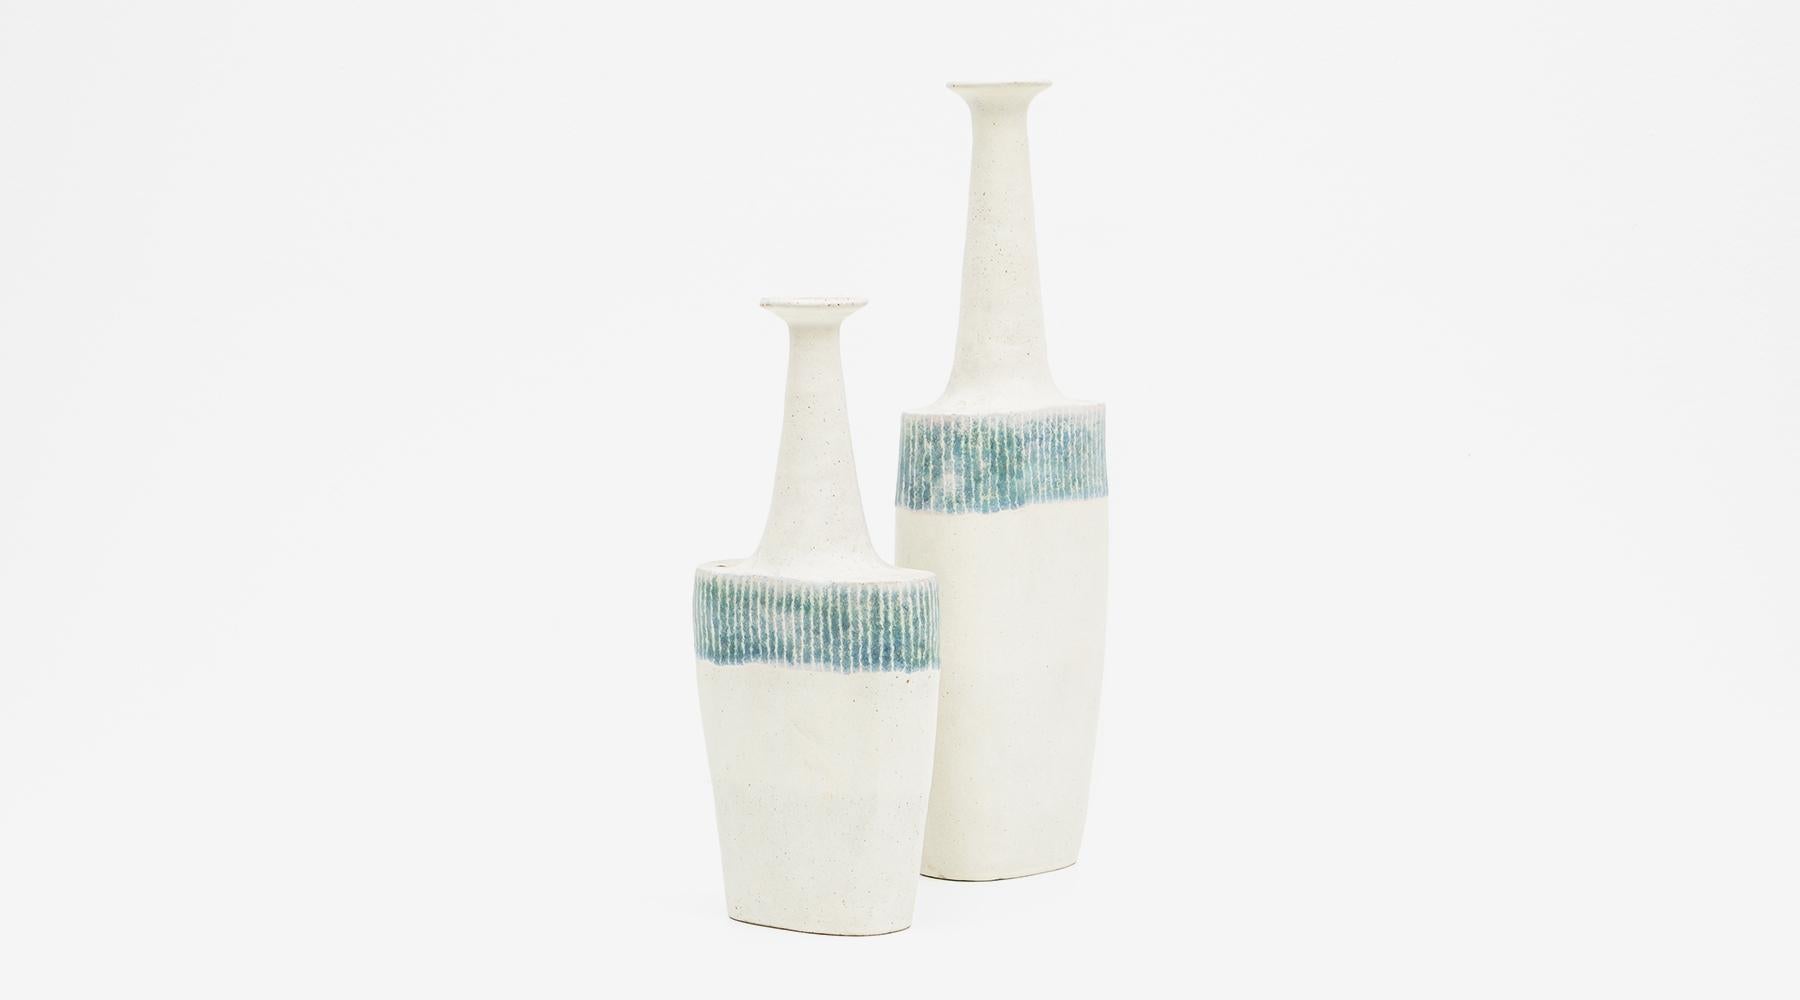 Set of two vases, ceramic, glazed, Bruno Gambone, Italy, 1970s.

Marvelous set of two oval bottles made by the multi-talented artist Bruno Gambone in 1980, varying in height but the width is the same. The vases come in a warm sand tone, on the